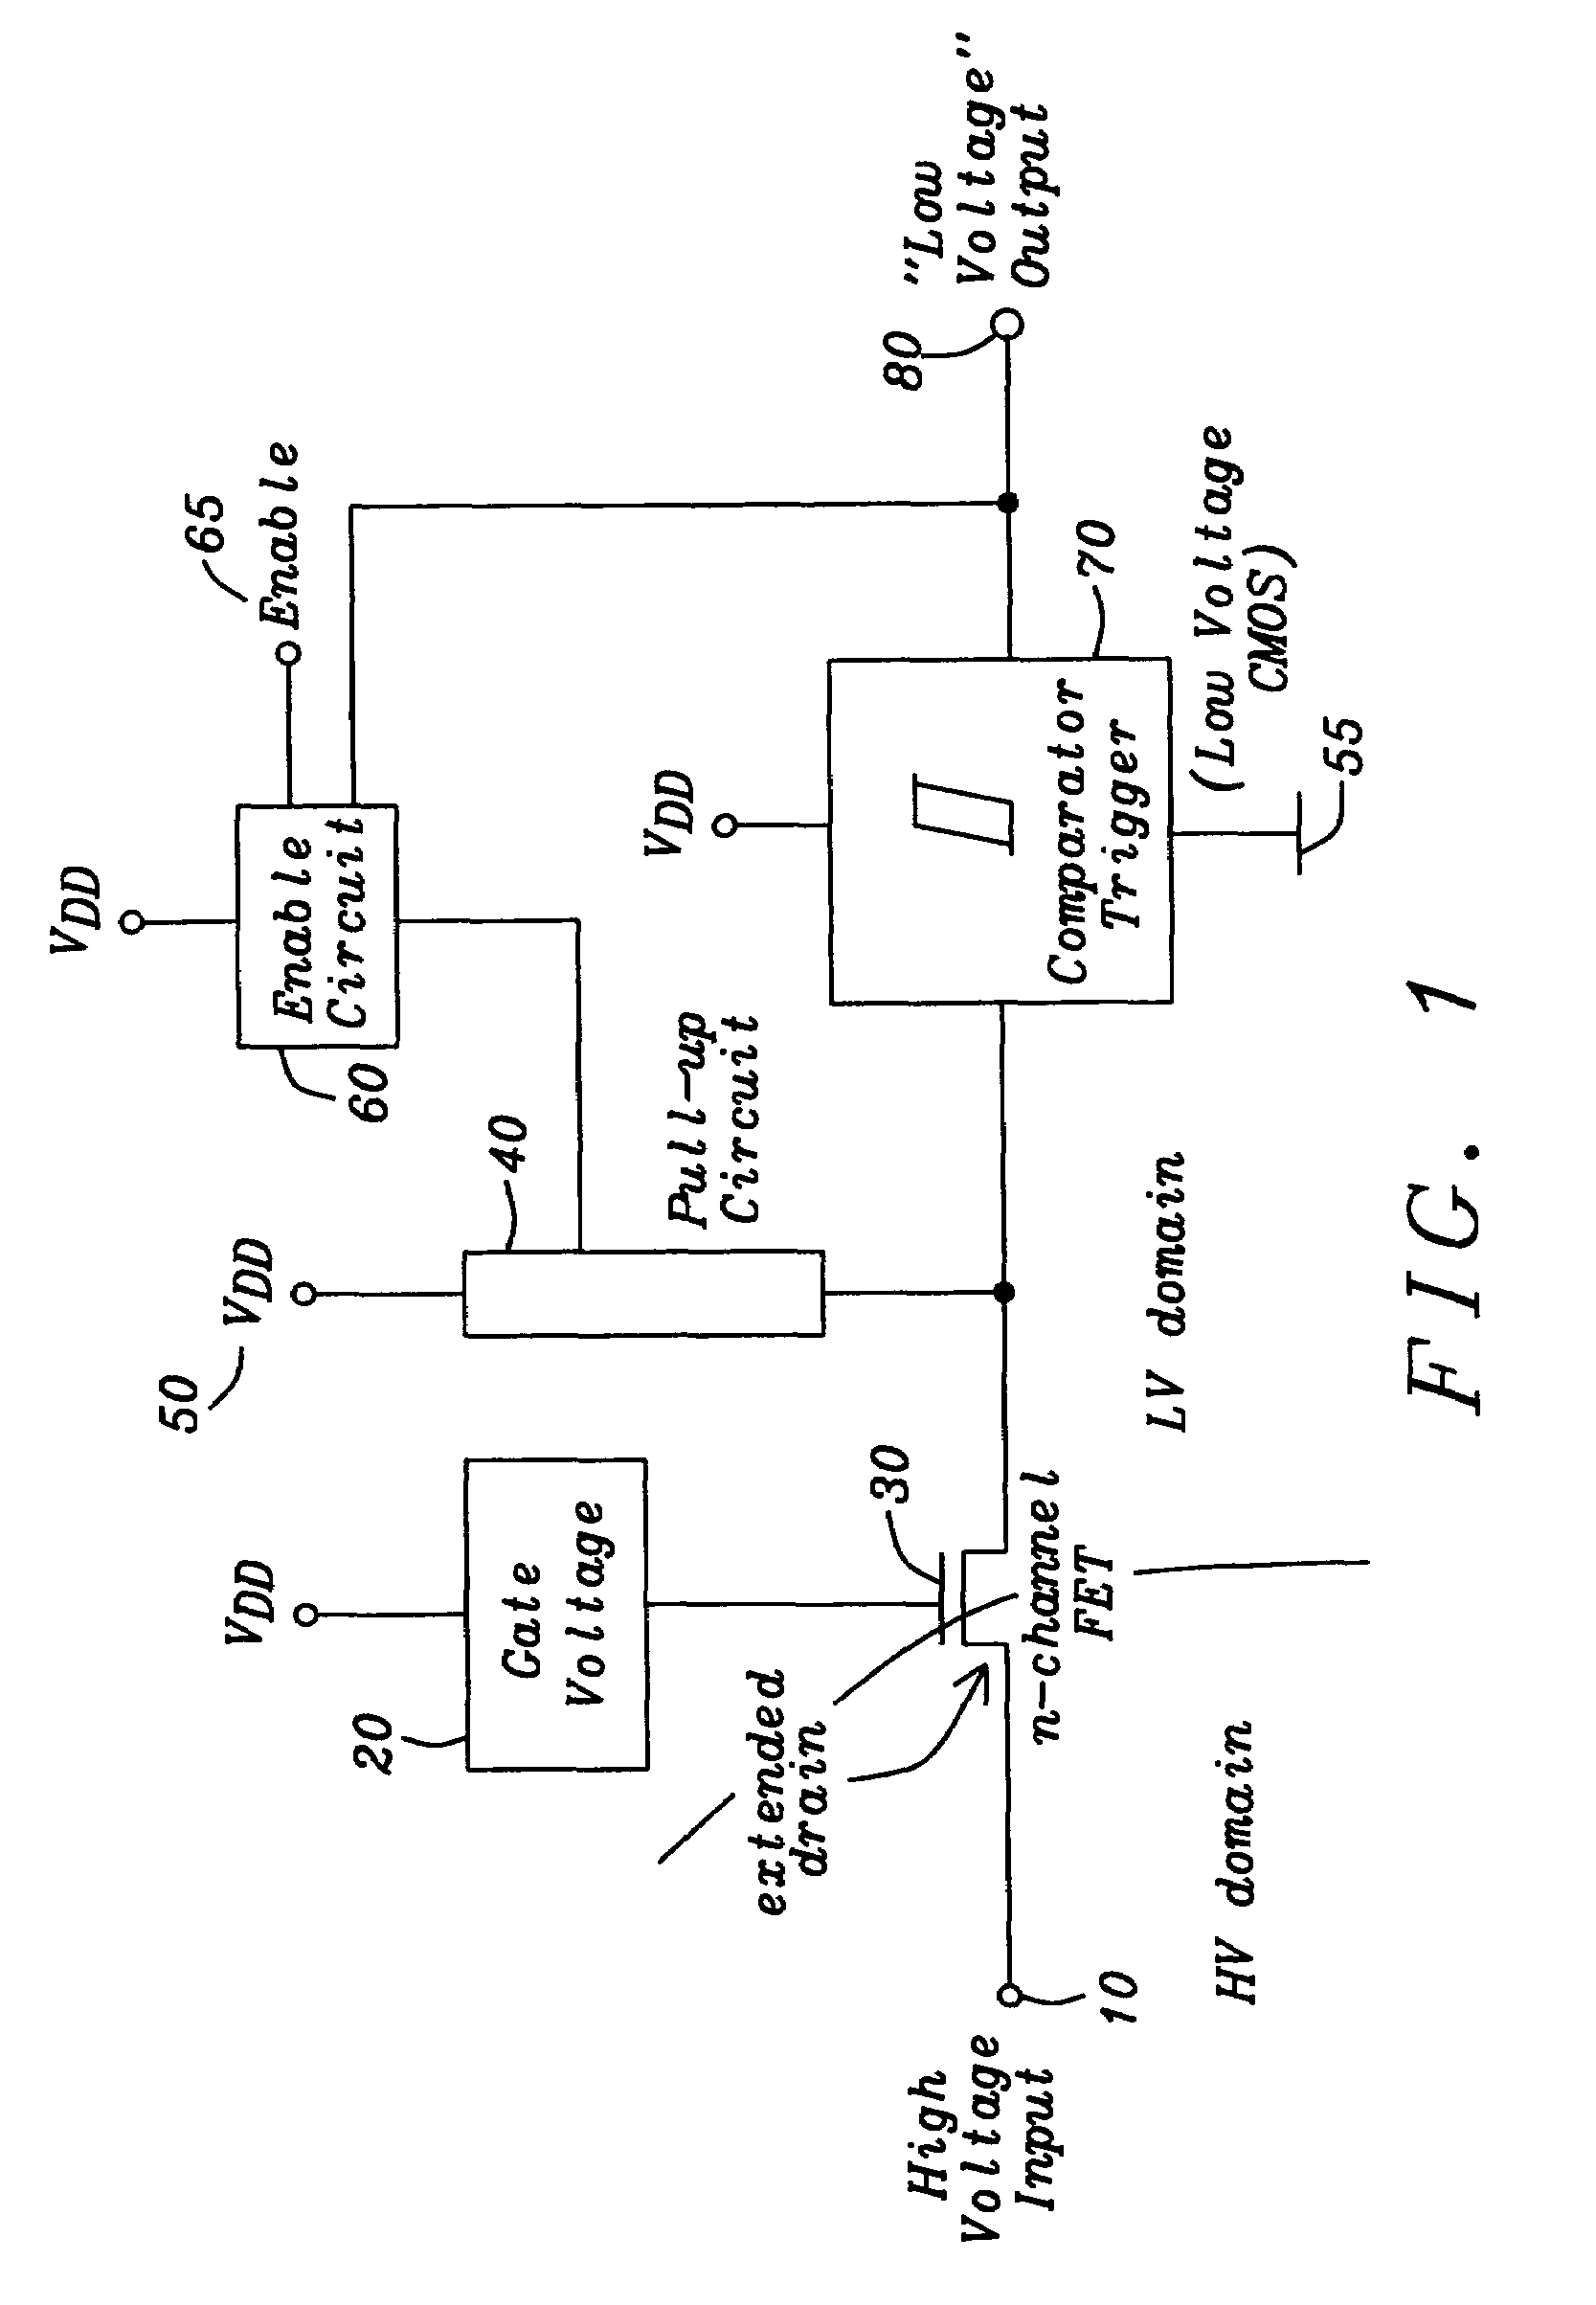 Digital CMOS-input with N-channel extended drain transistor for high-voltage protection